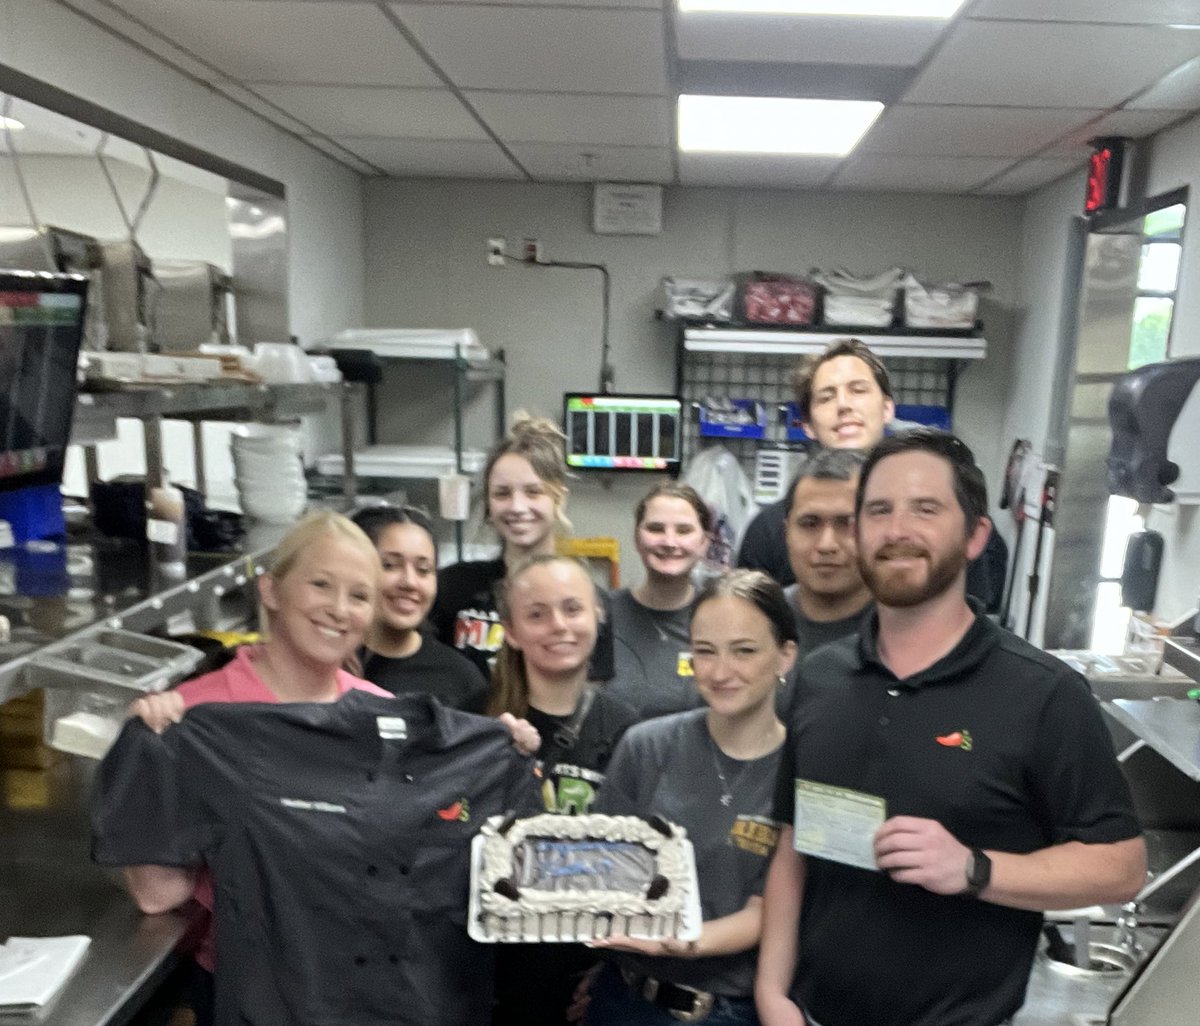 Here we #chilisgrow again 🌻Congratulations Heather! You crushed your validation and I see great things in your future! Can’t wait to watch your story unfold. @aarongant2 @HeatherF111589